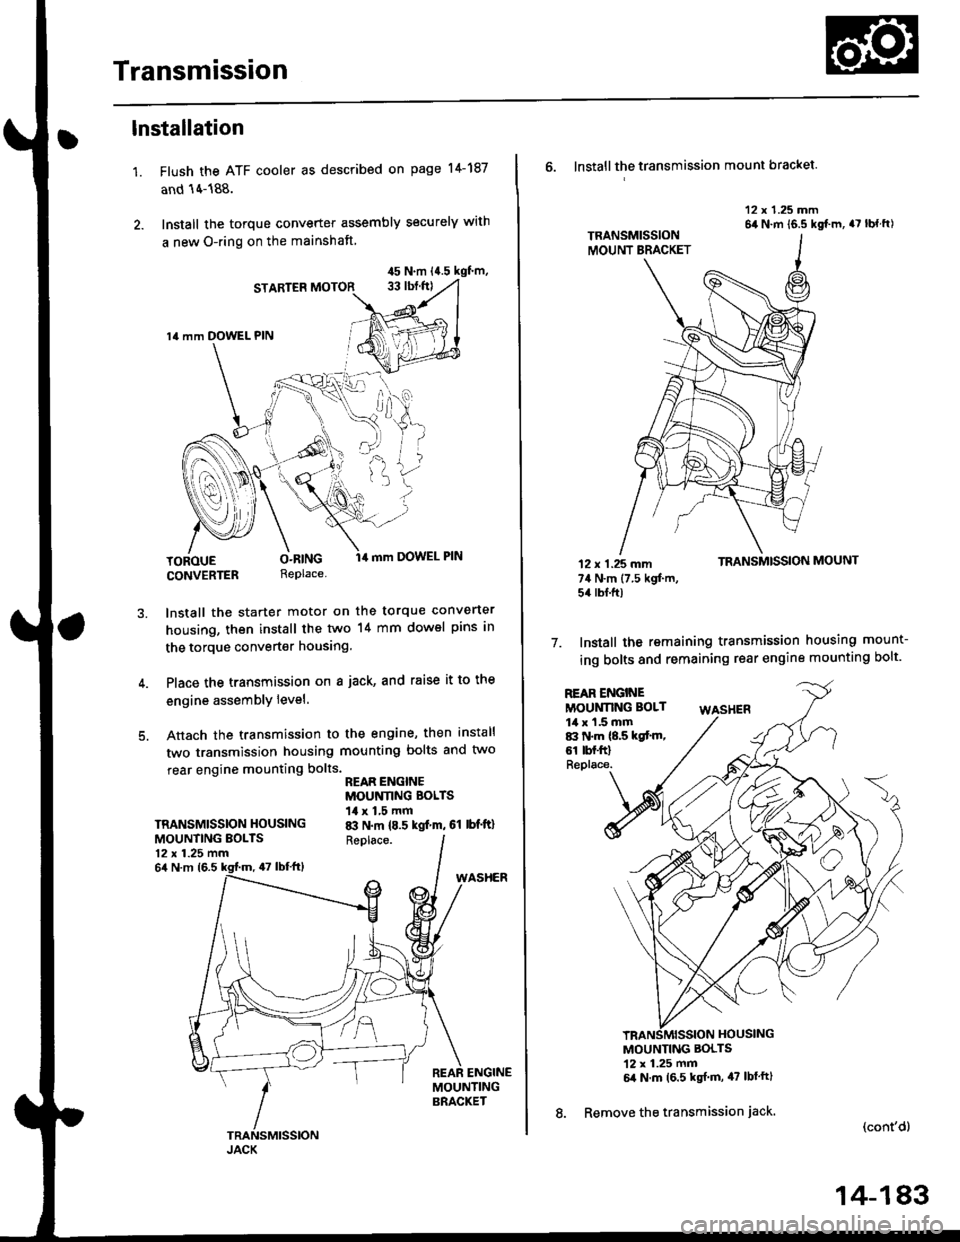 HONDA CIVIC 1996 6.G Workshop Manual Transmission
1.
lnstallation
Flush the ATF cooler as described on page l4-187
and 14-188.
Install the torque converter assembly securely with
a new O-ring on the mainshaft
STARTER MOTOR
14 mm DOWEL PI